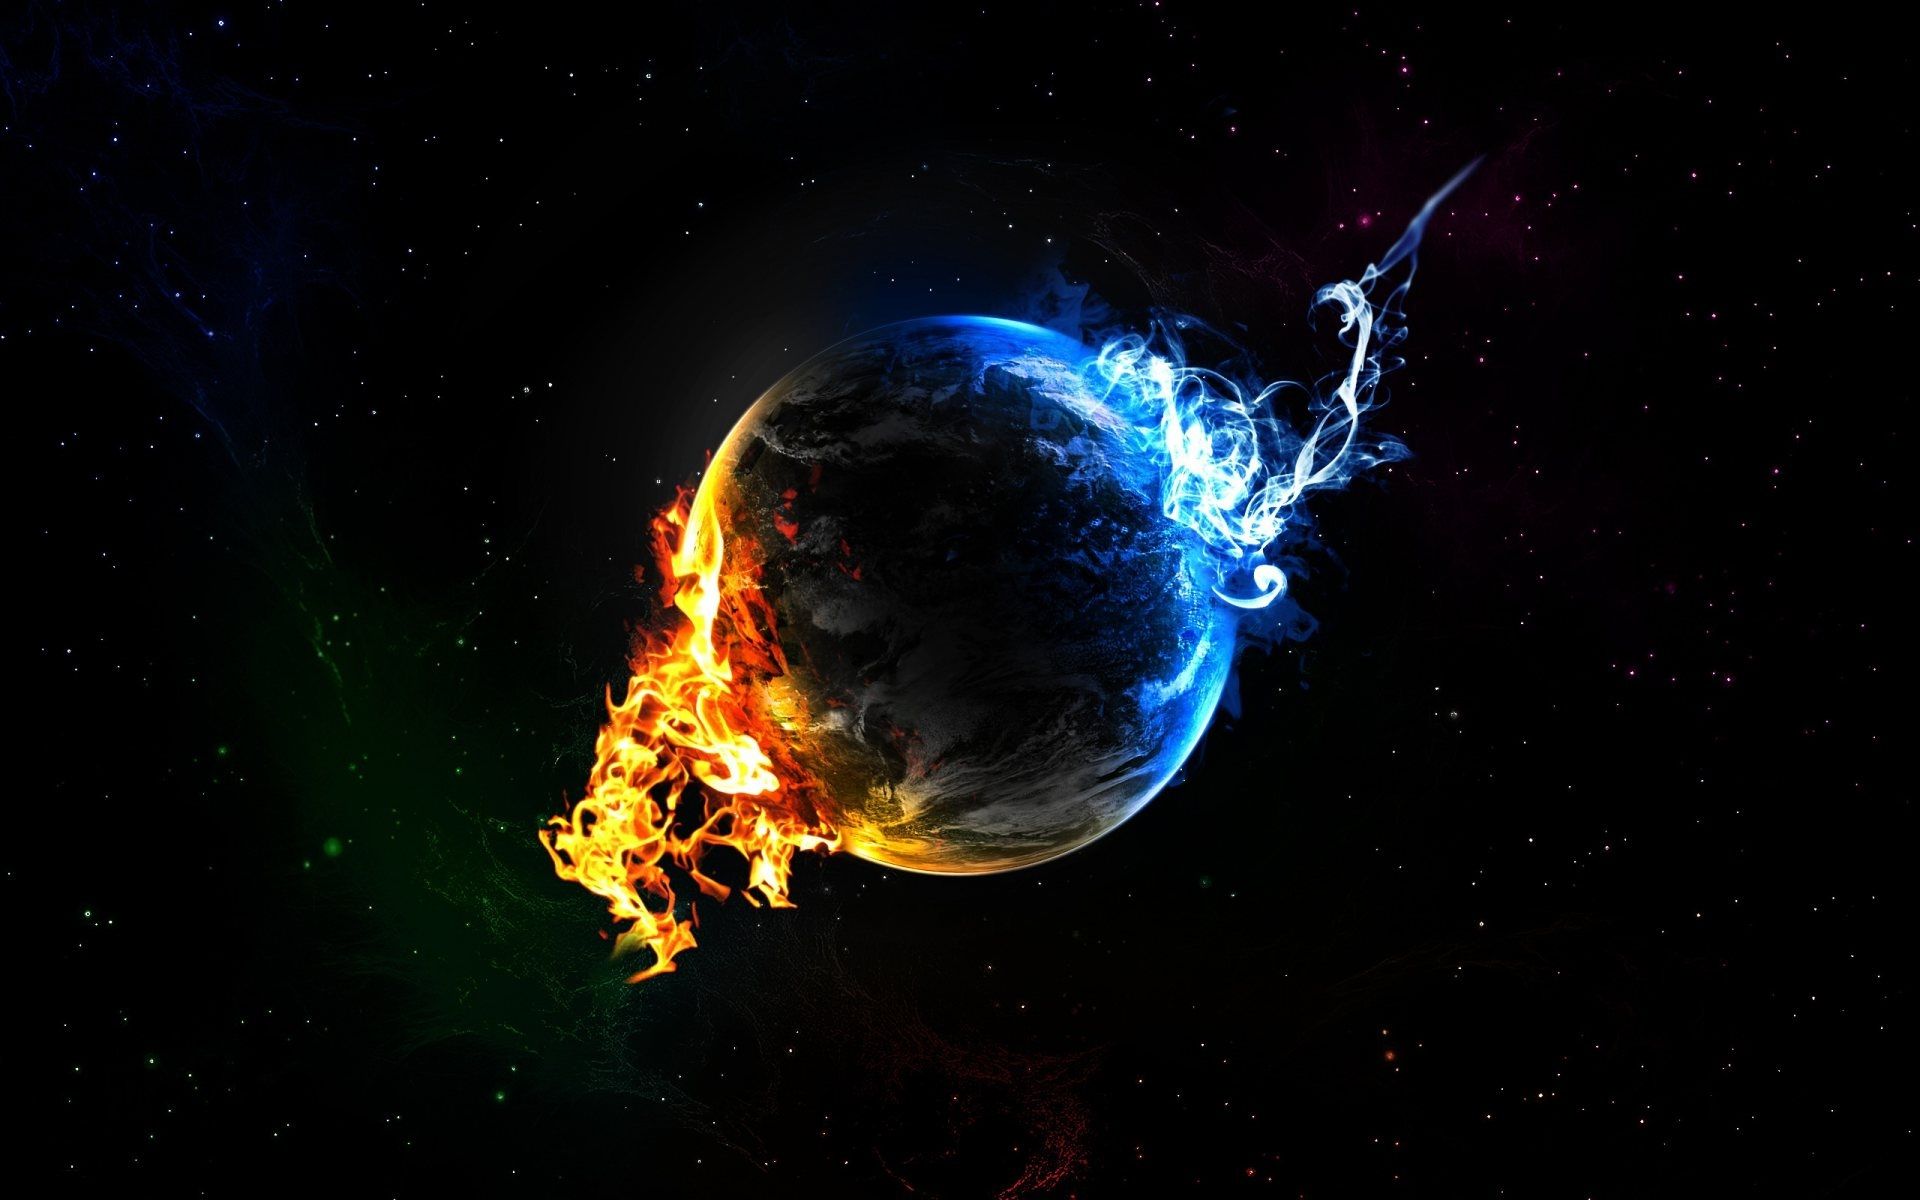 Fire And Ice wallpaper, Abstract, HQ Fire And Ice pictureK Wallpaper 2019